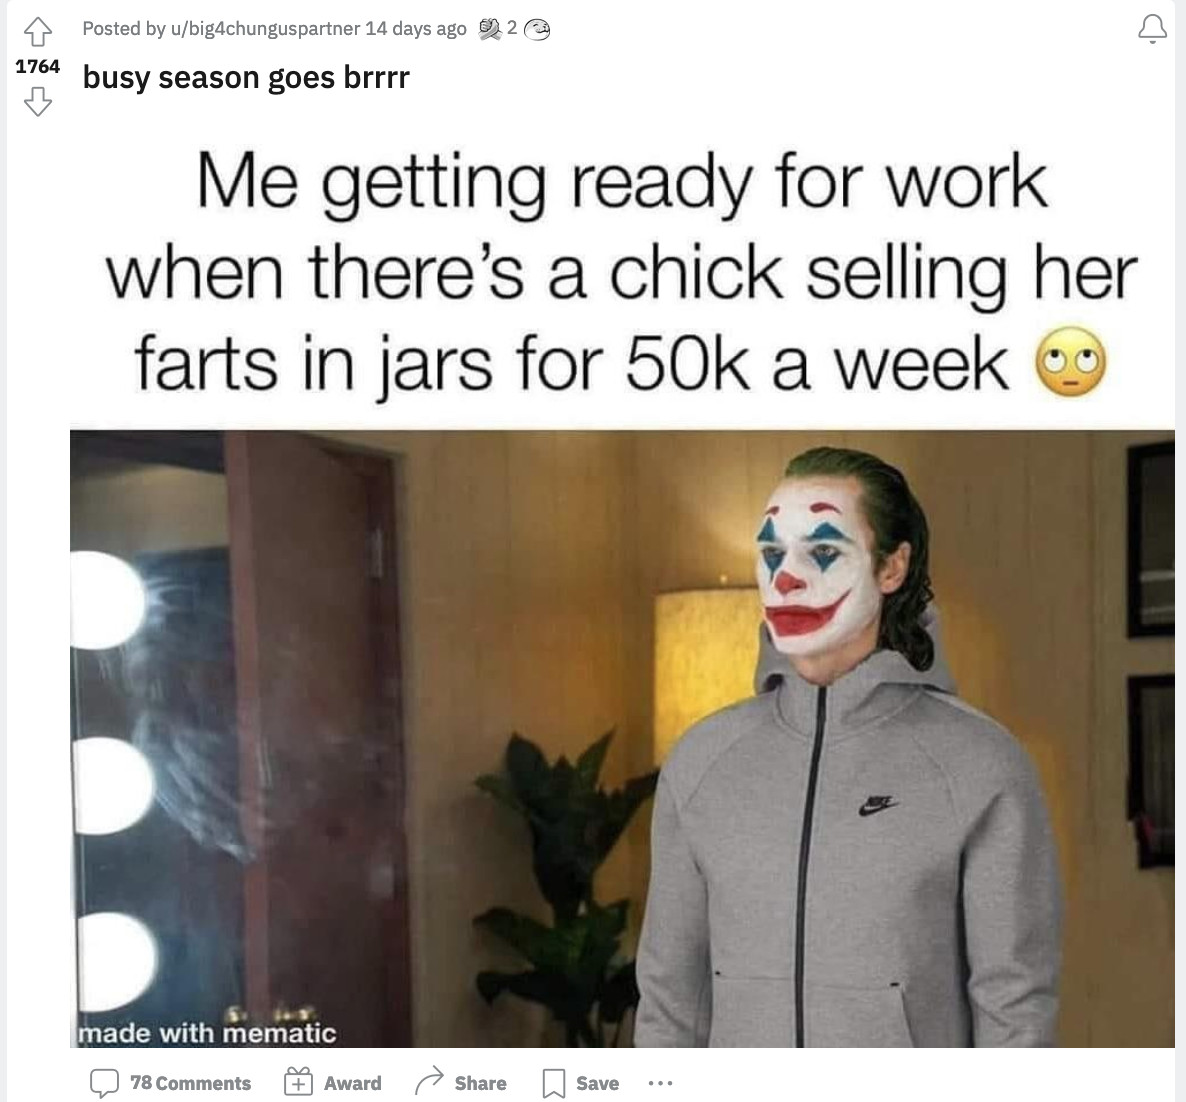 A man in clown makeup faces a mirror. The image is titled “Me getting ready for work when there’s a chick selling her farts in a jar for 50k a week.”